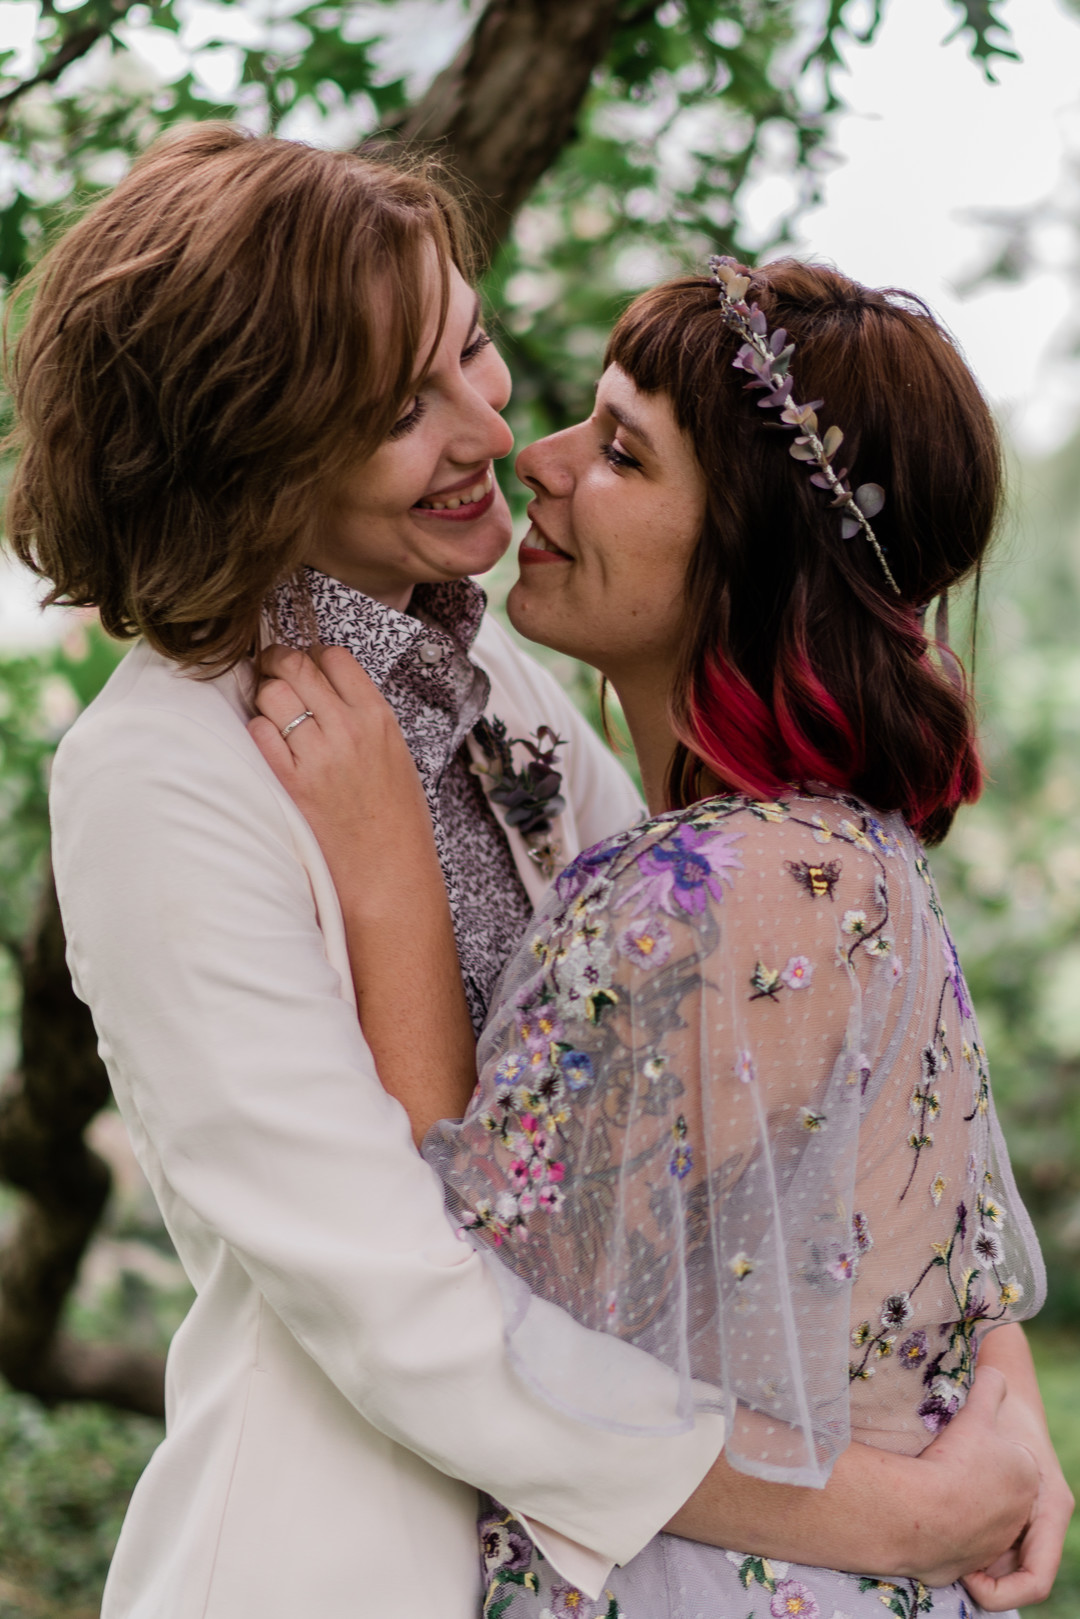 These fall elopement photos in a cemetery are giving us Halloween vibes LGBTQ+ weddings two brides pre-elopement photos moody romantic fairy tale old trees outdoor